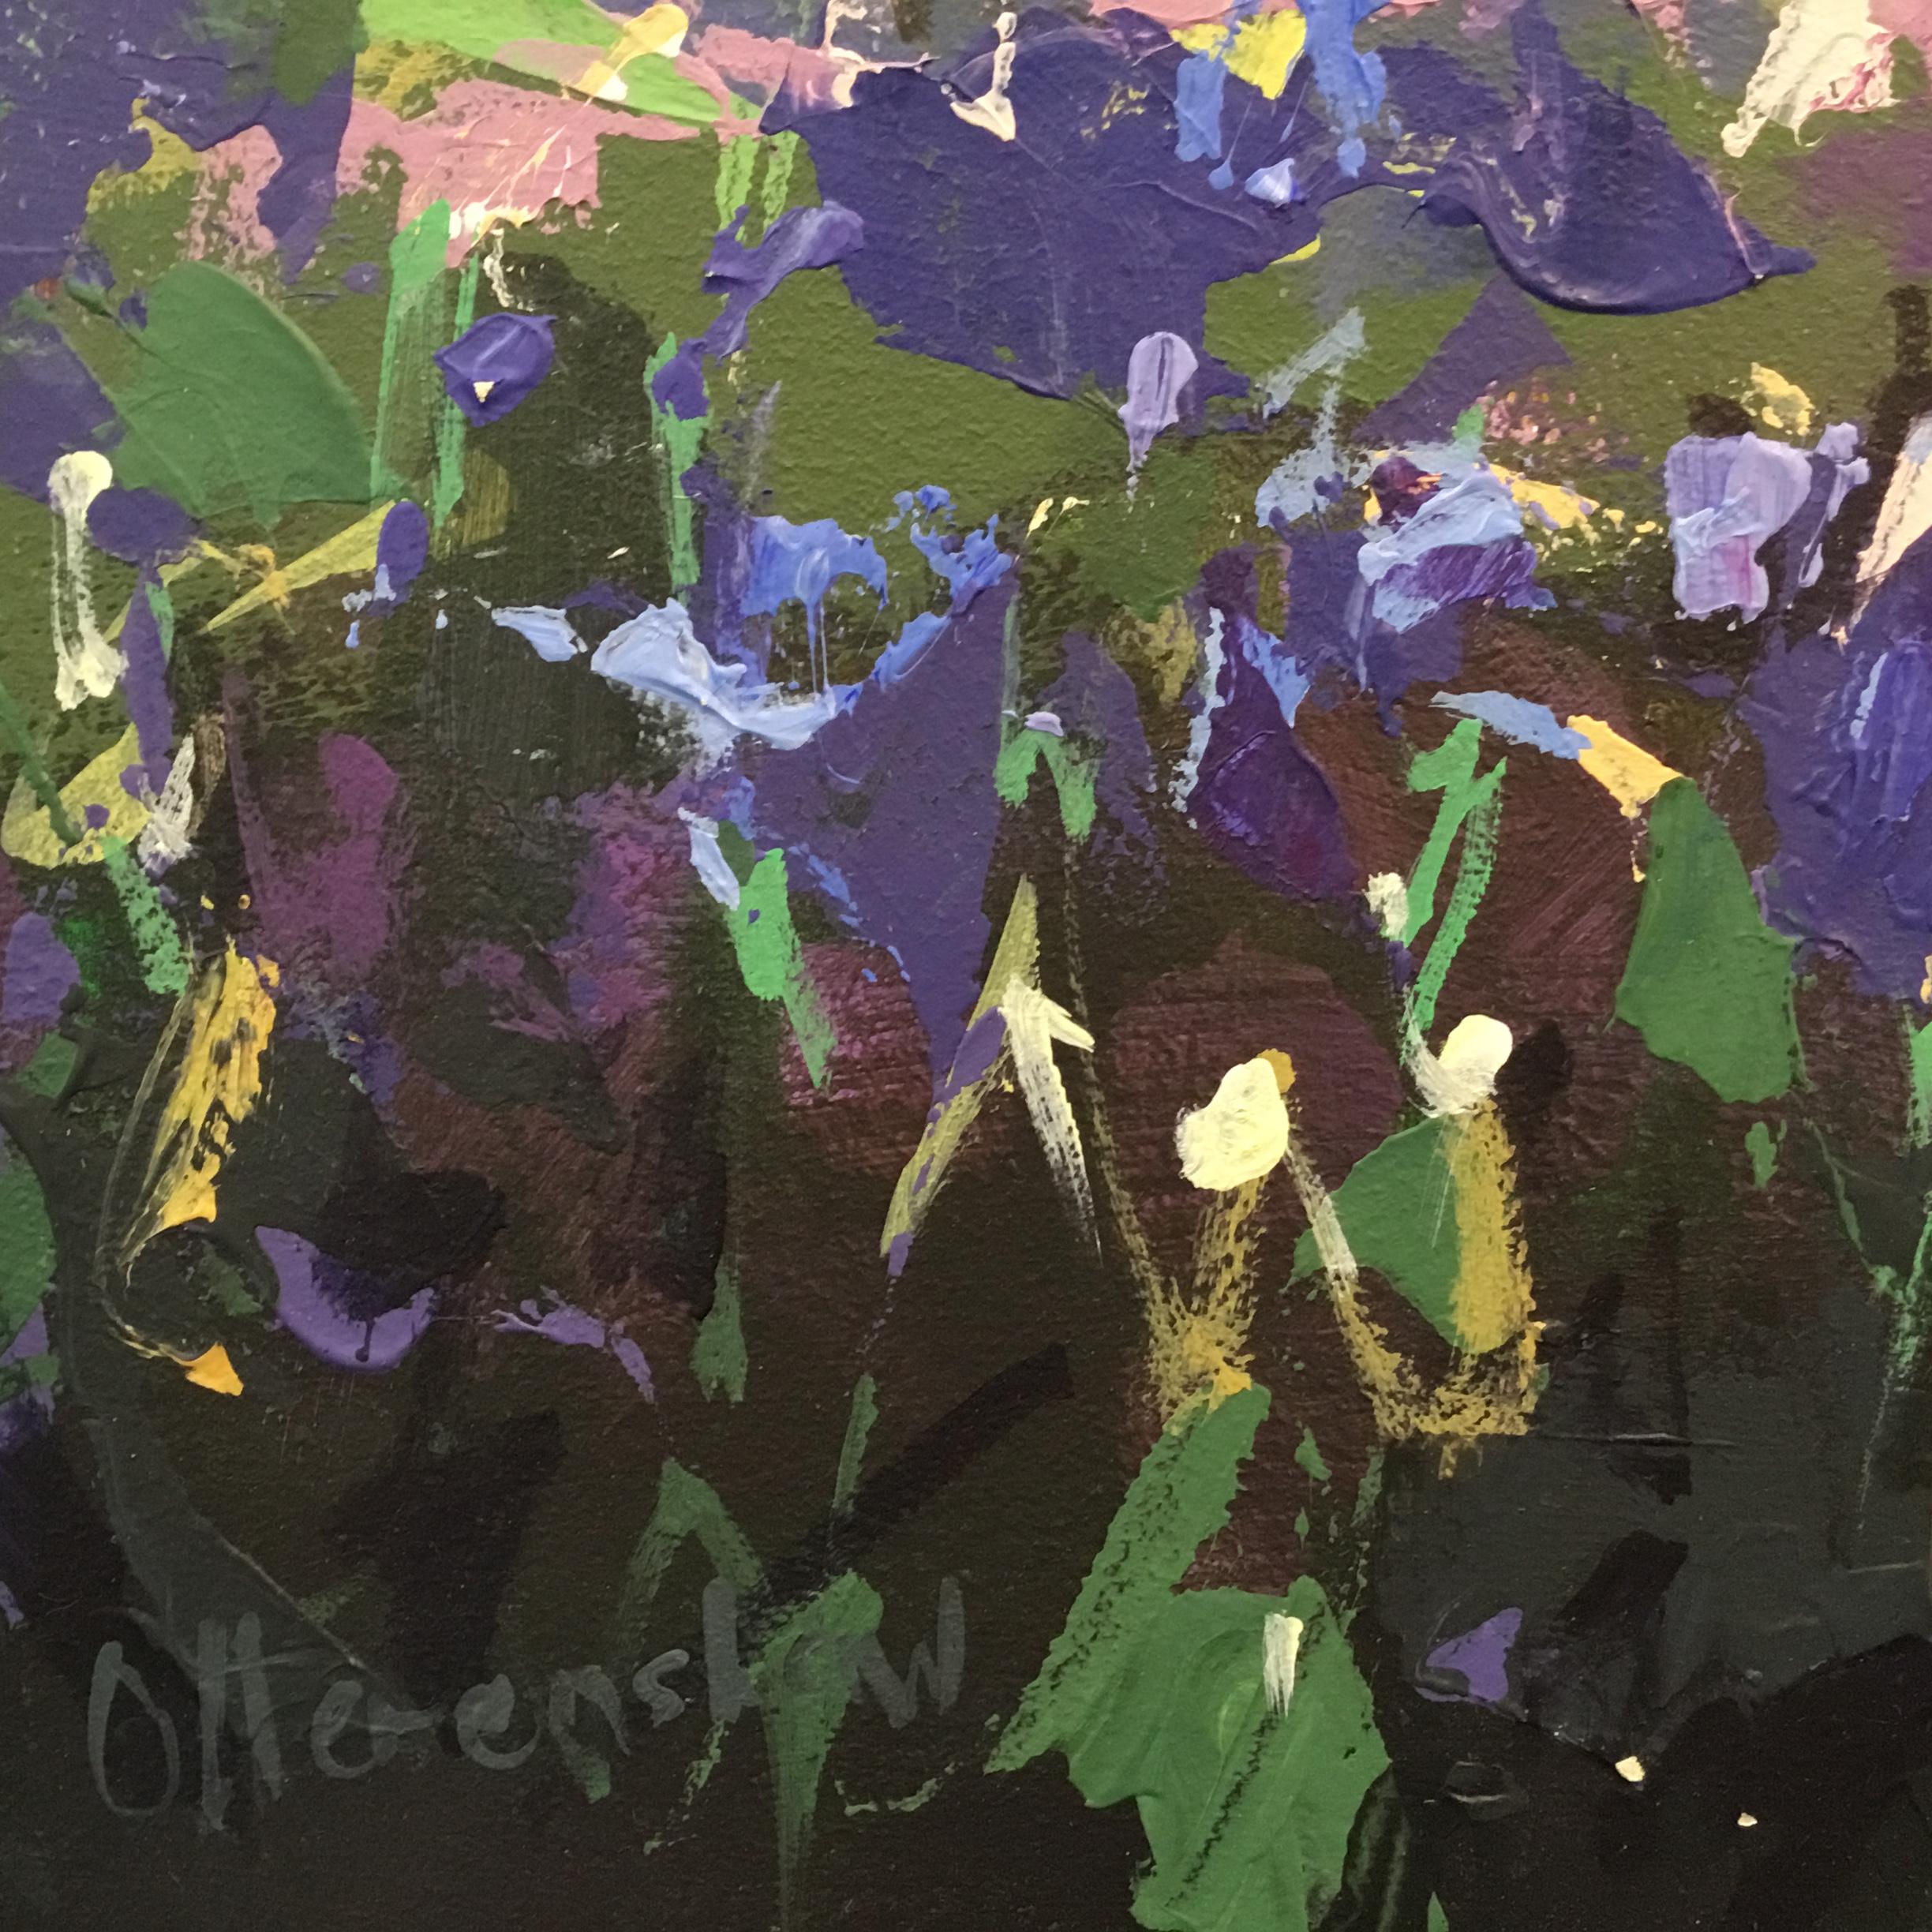 You Go Before Me, landscape art , purple, brown and green painting  - Painting by Sarah Ollerenshaw